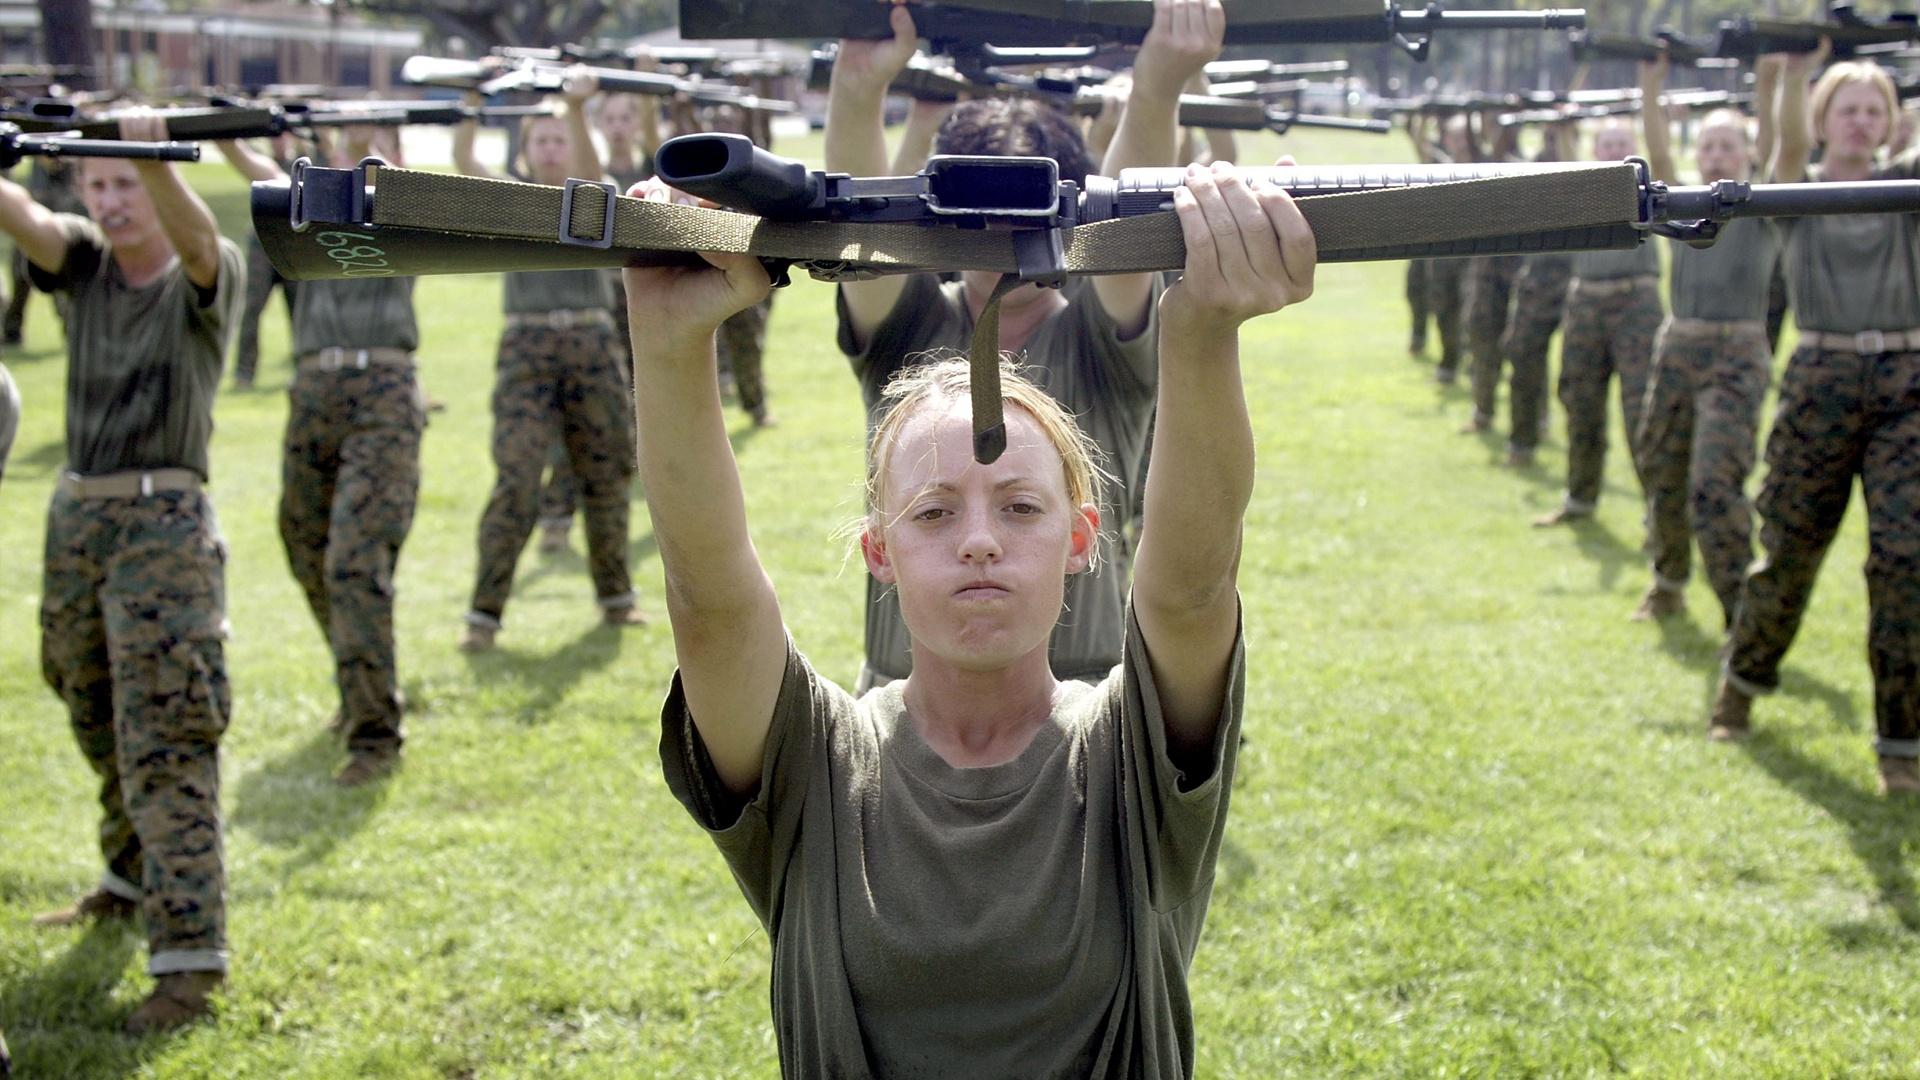 Female military personnel hold up rifles in training exercise